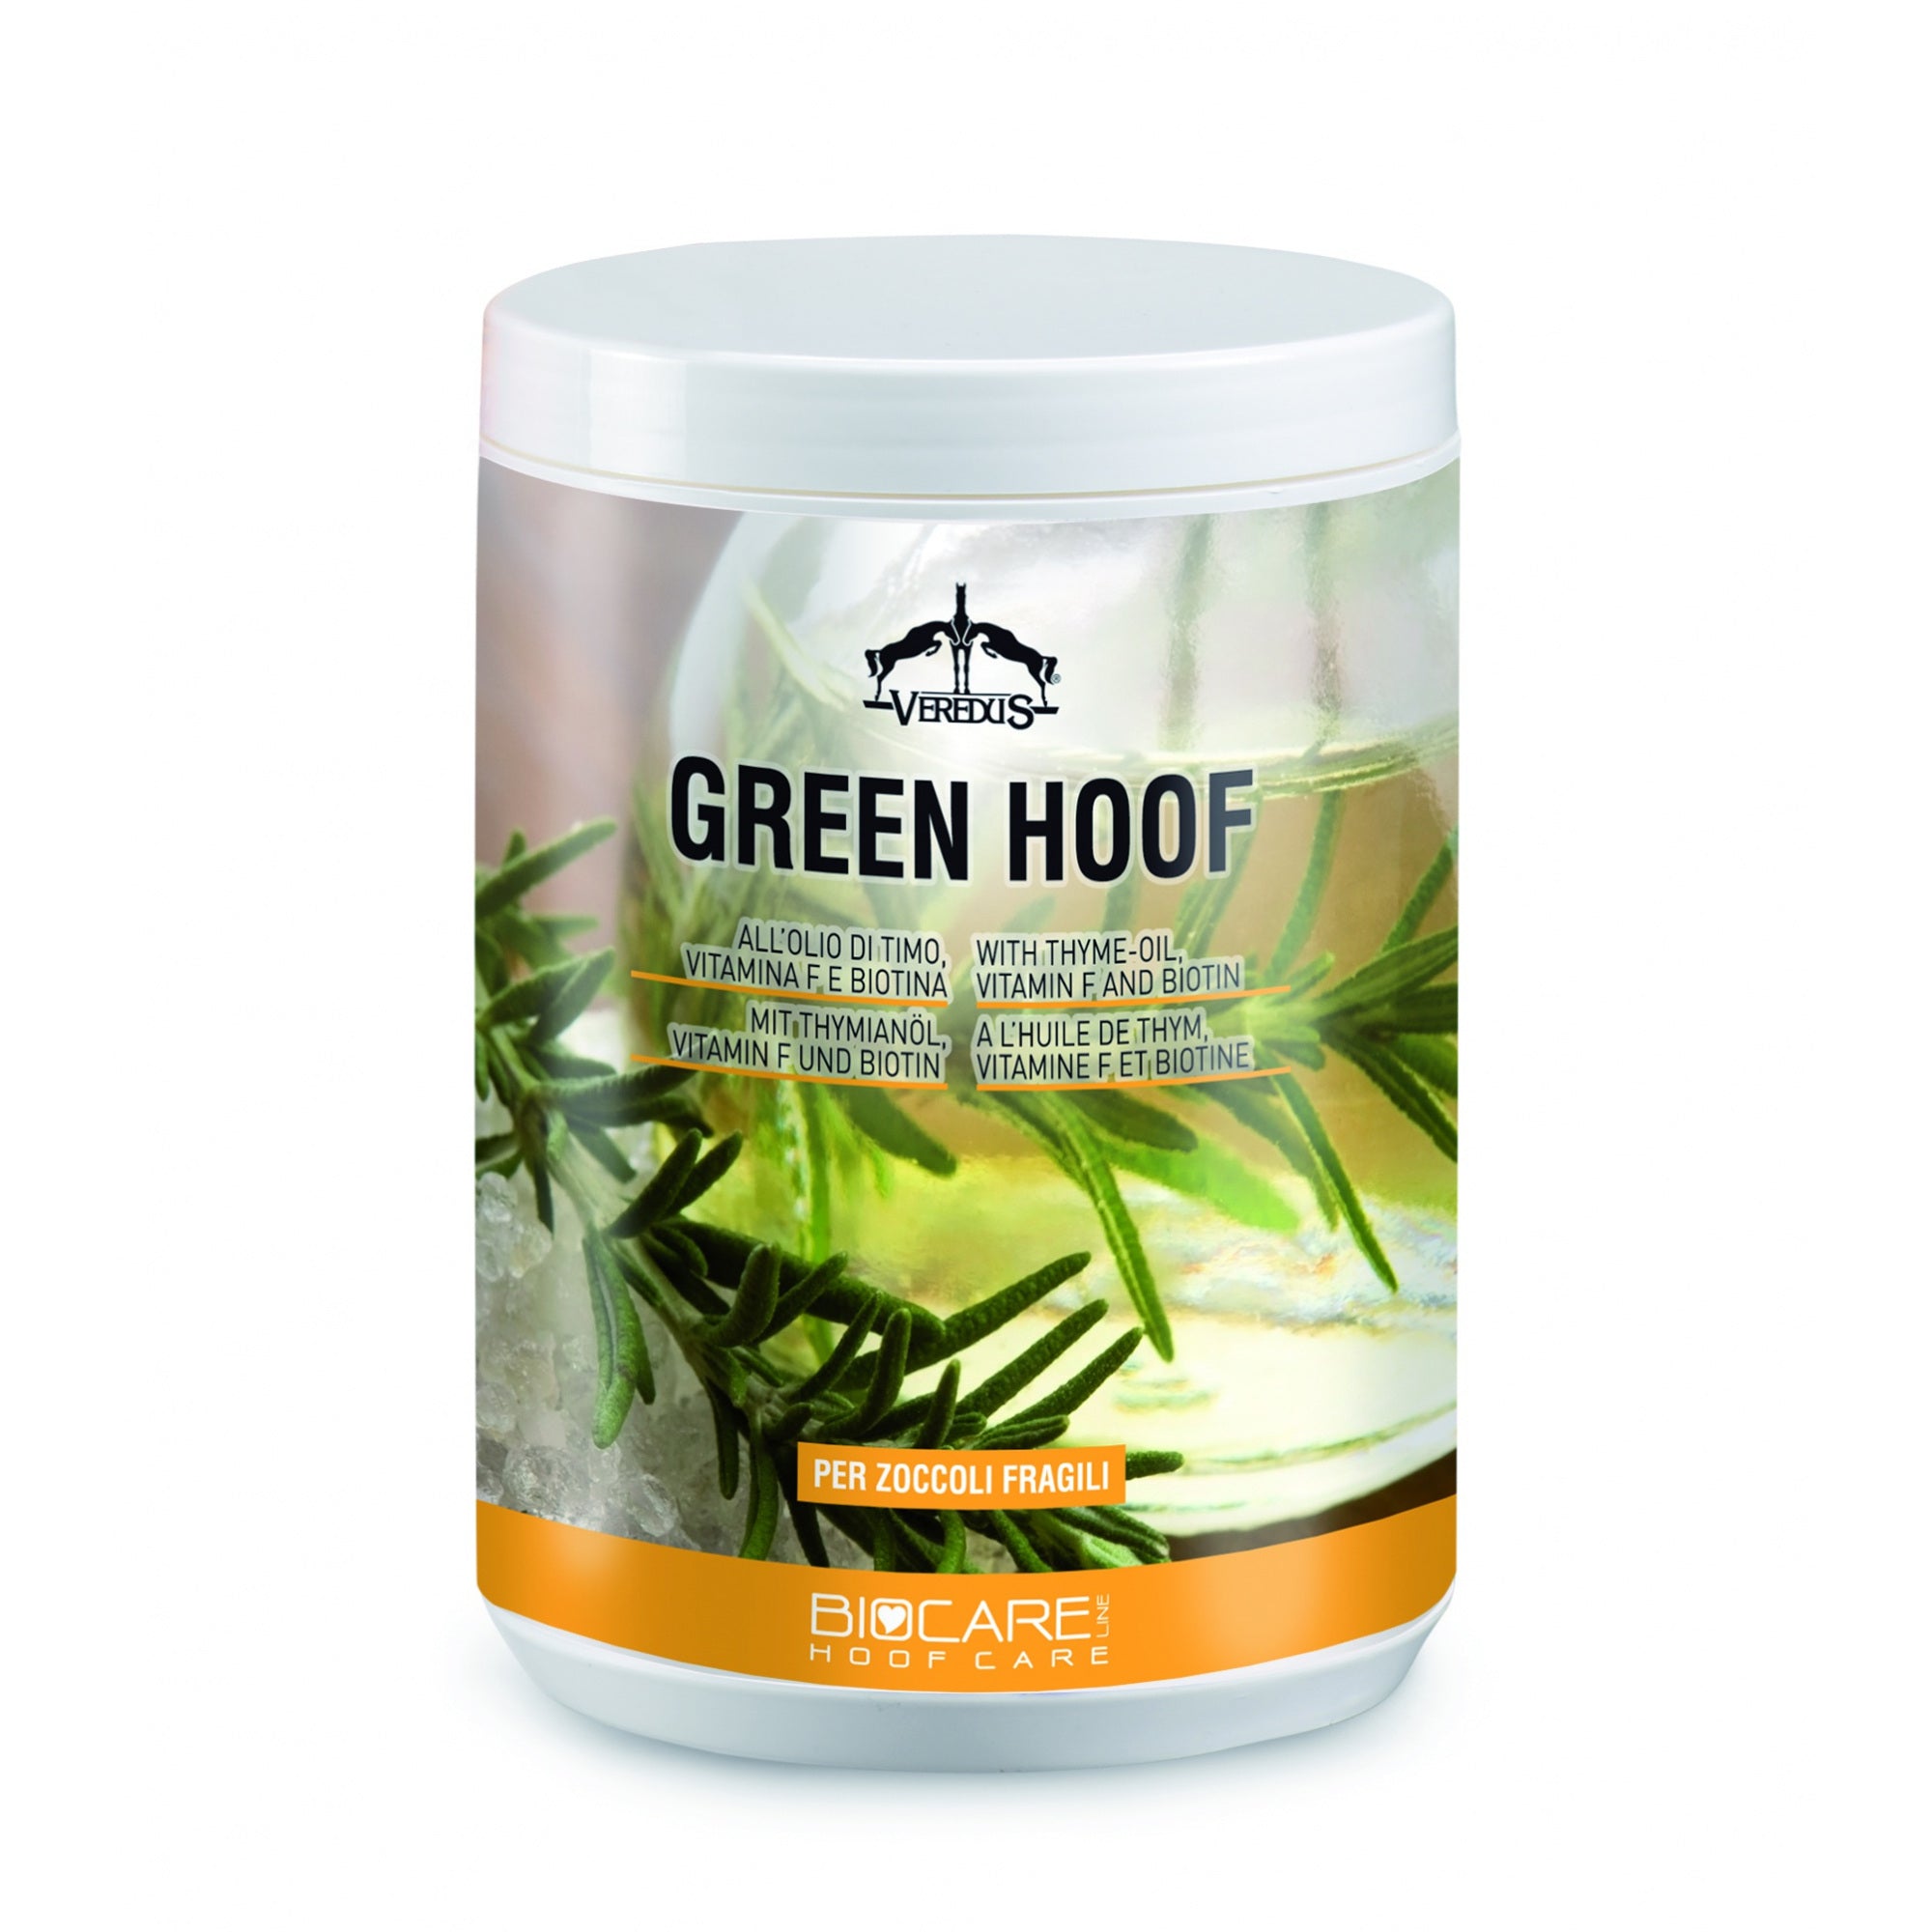 product shot image of the Green Hoof